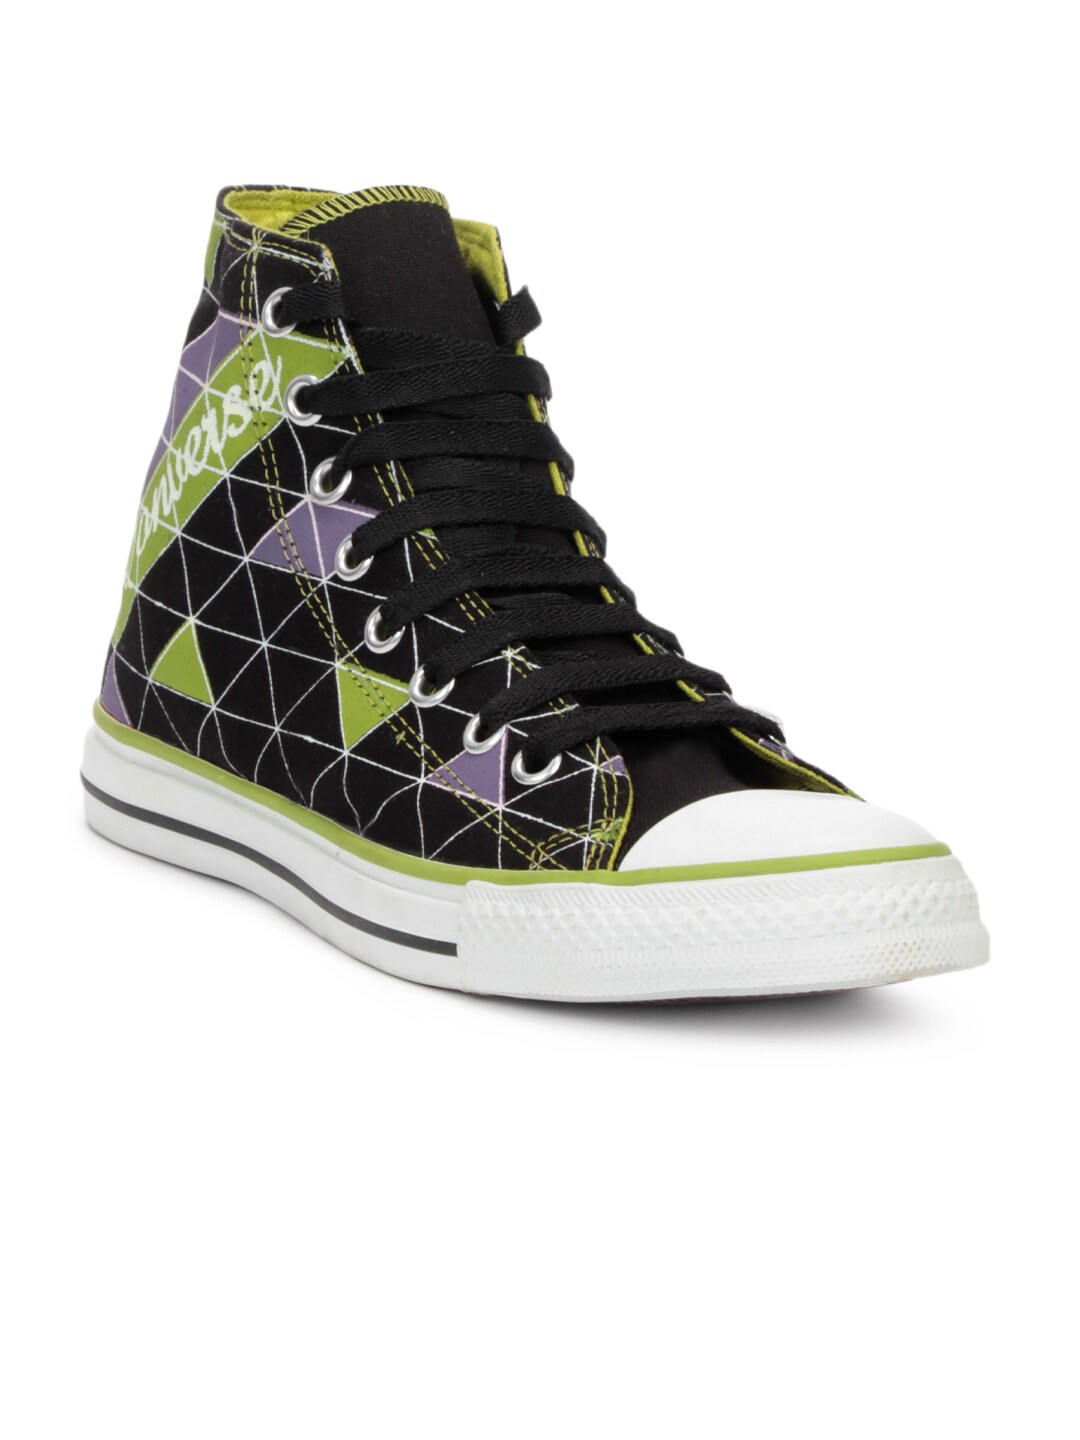 Converse Unisex Printed Black & Green Shoes